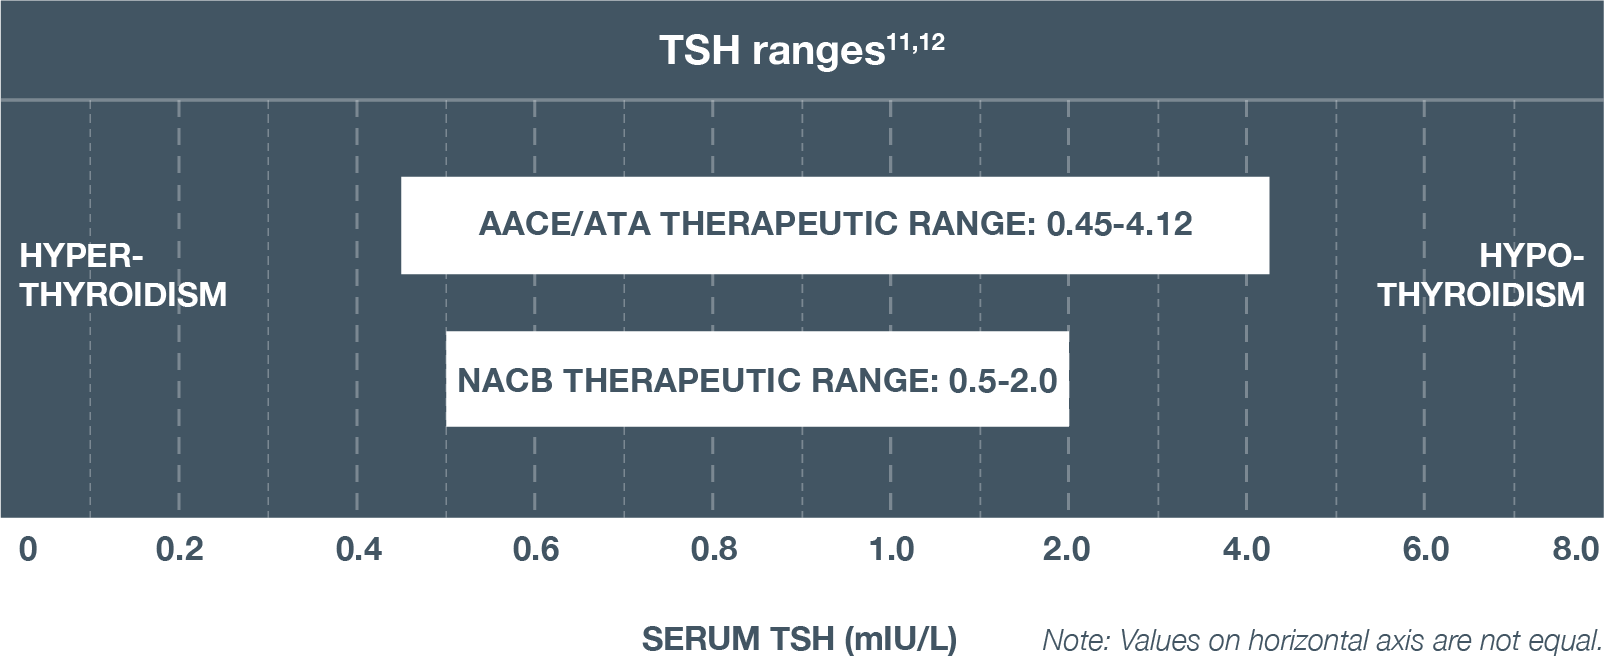 Chart showing AACE/ATA therapeutic range: 0.45-4.12 and NACB therapeutic range: 0.5-2.0 guidelines.